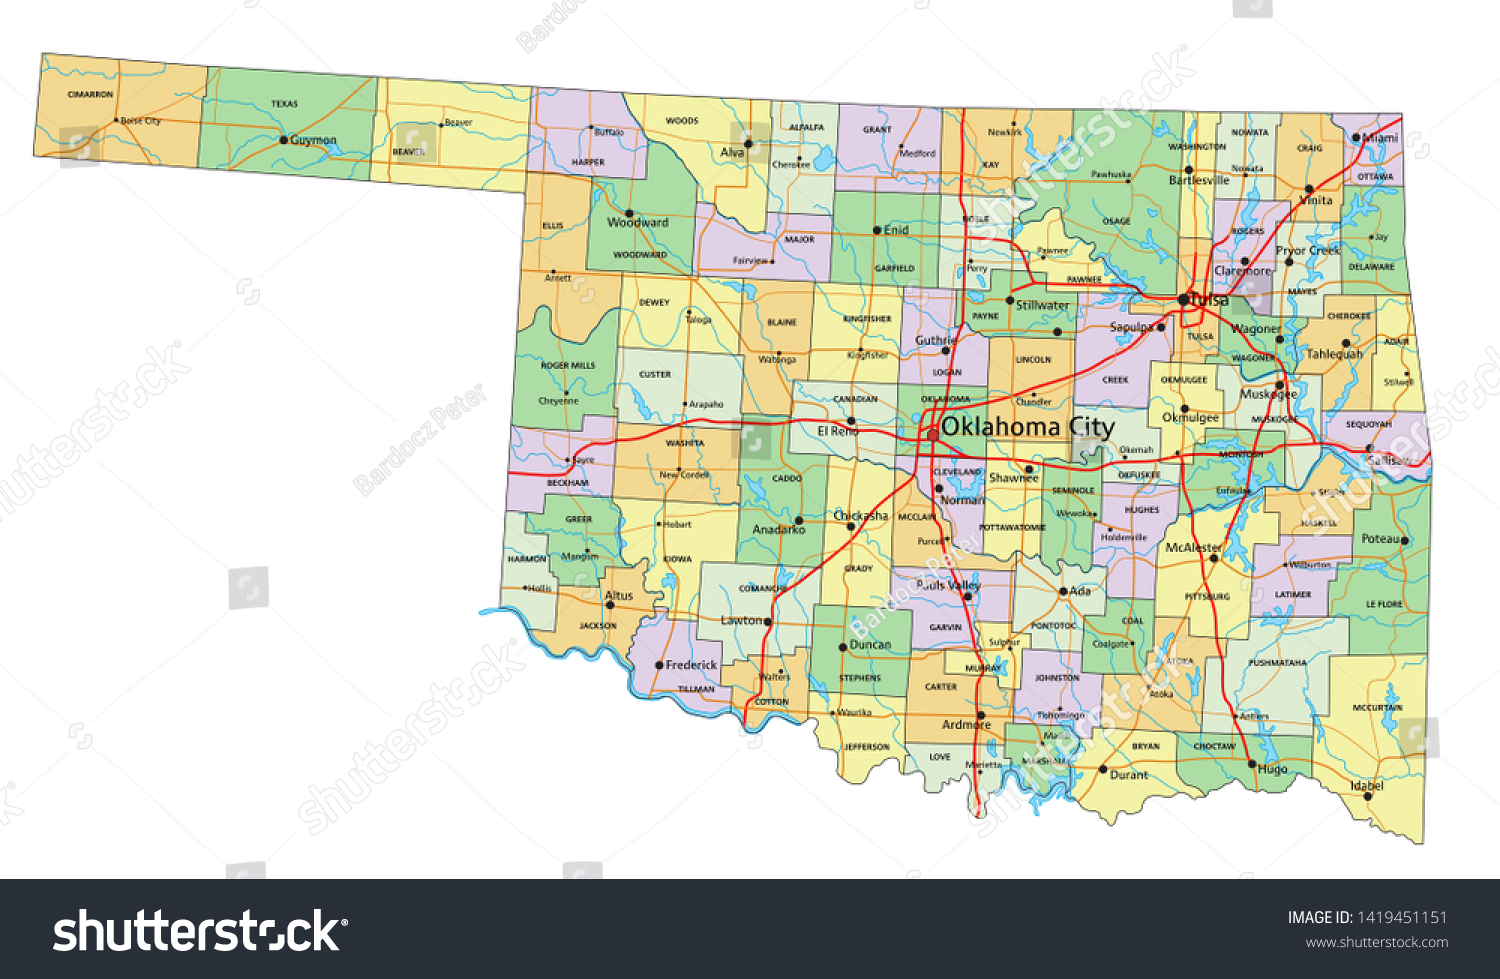 Architectural 3d Oklahoma Political Map Cgtrader 7875